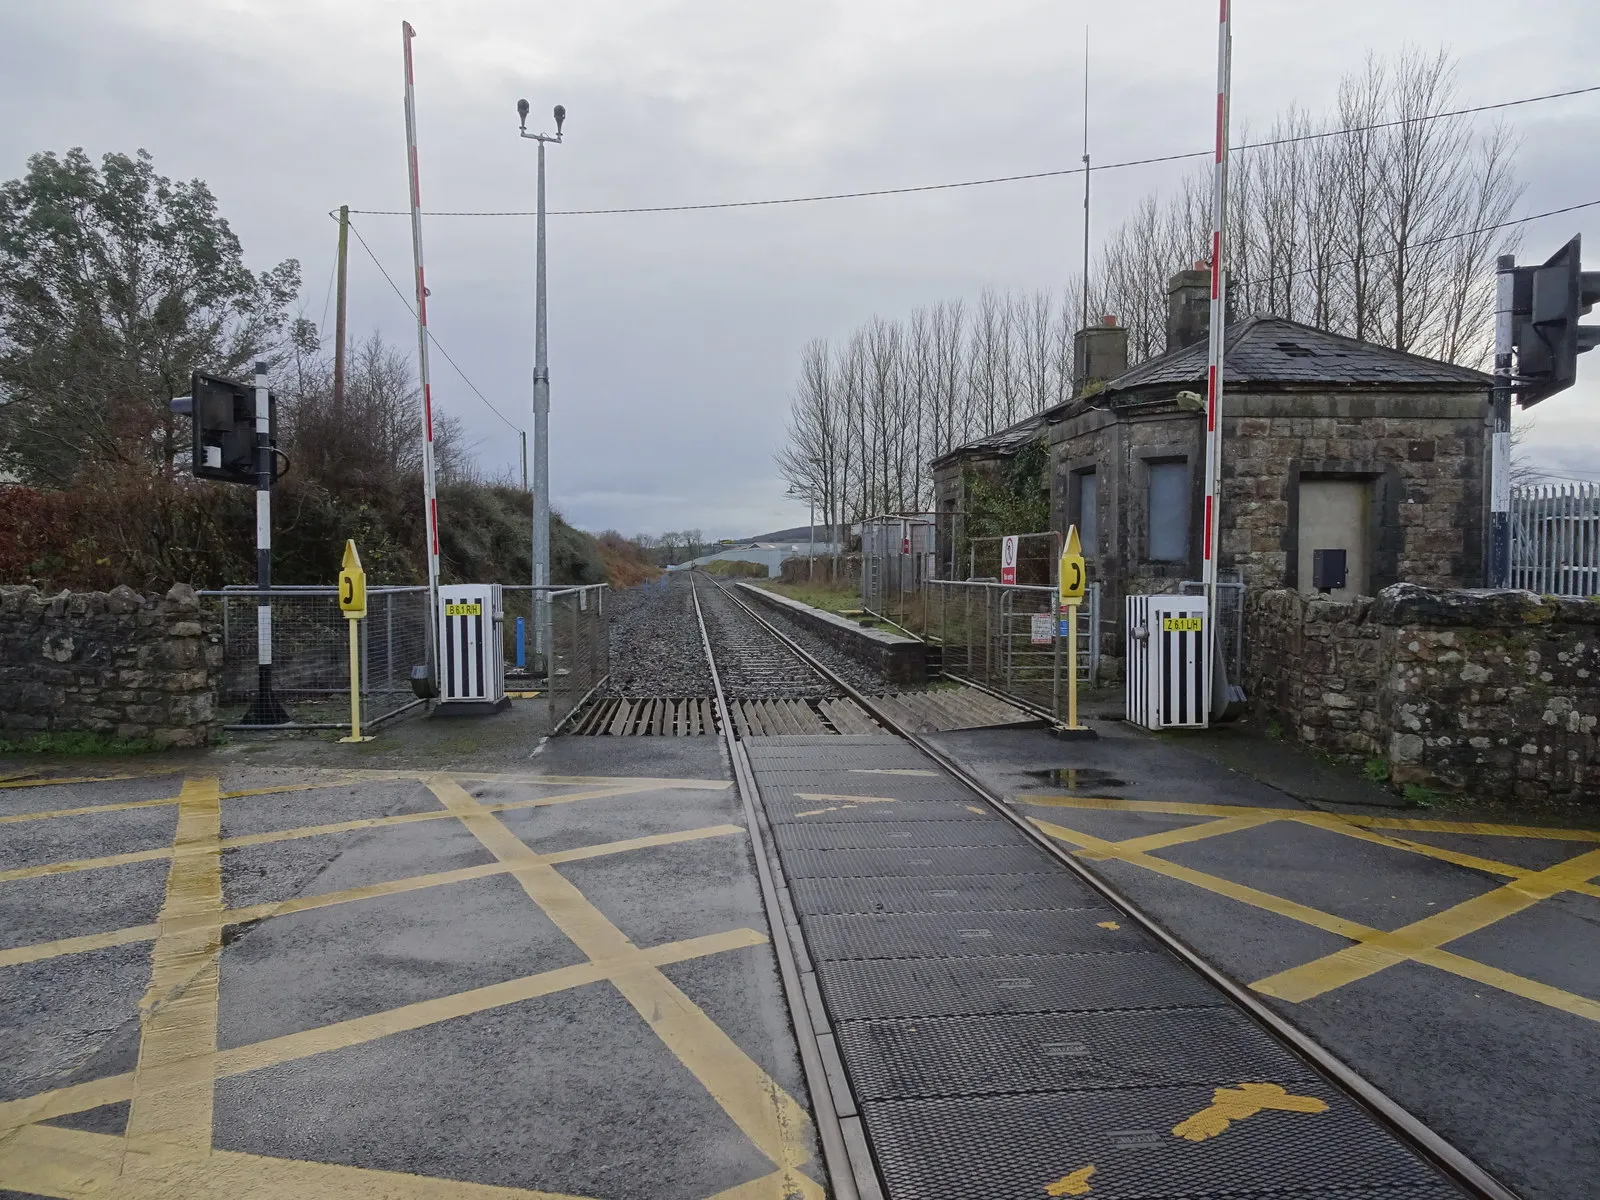 Photo showing: Mullinavat railway station (site), County Kilkenny Opened in 1853 by the Waterford & Kilkenny Railway on the line between those two places, it later became part of the Great Southern & Western Railway. This station closed in 1963.
View south towards Kilmacow and Waterford. One of the two former platforms and the main building were extant when this image was taken, but the building appears derelict.